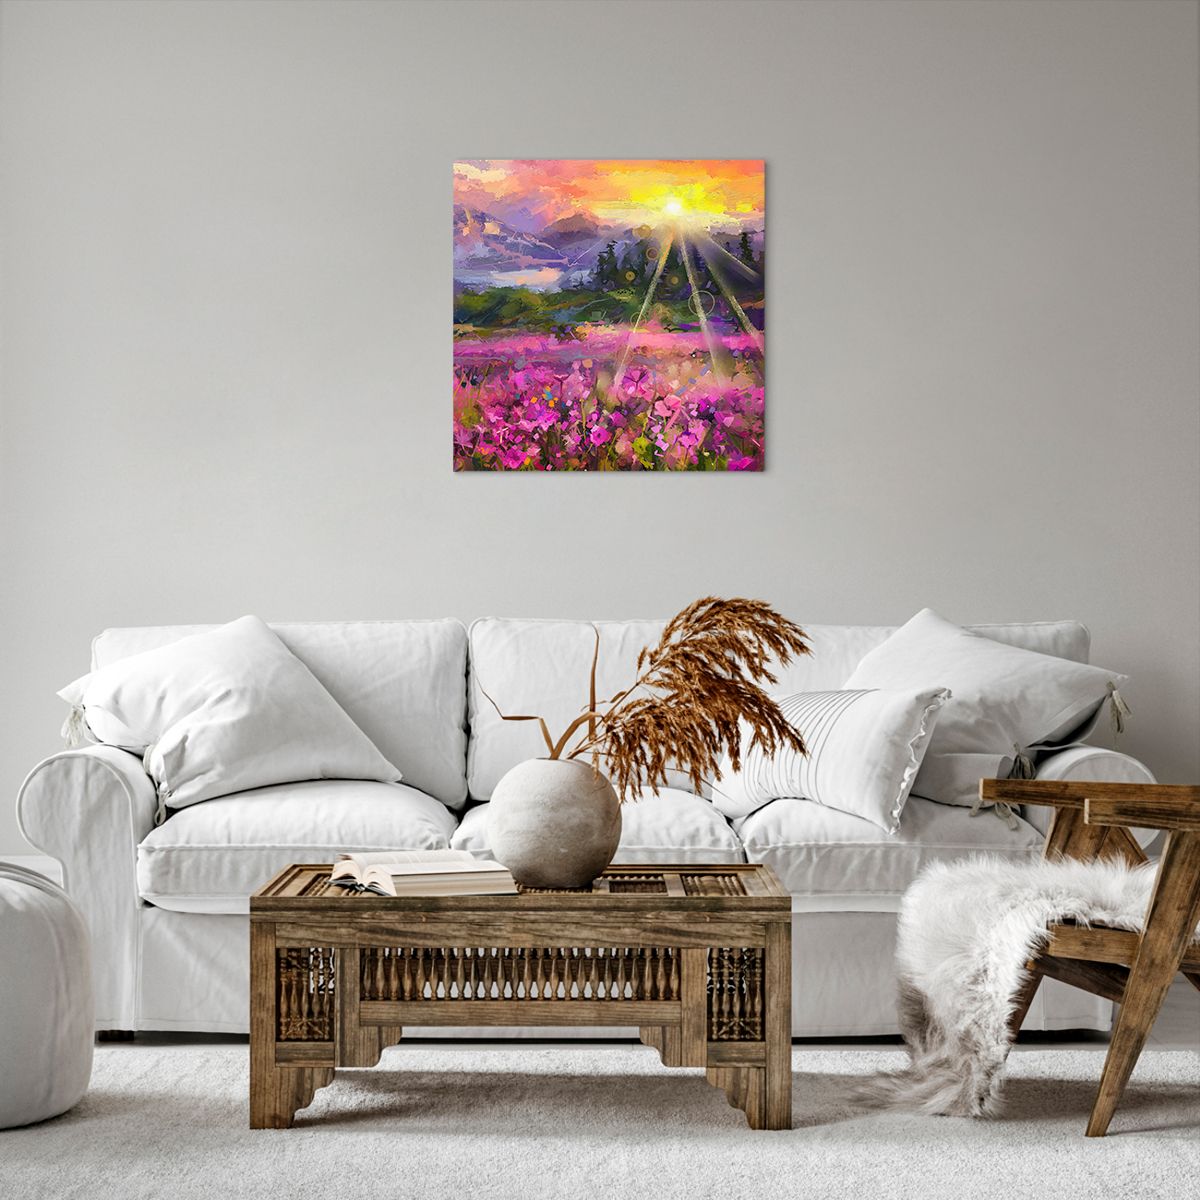 Impression sur toile Abstraction, Impression sur toile Paysage, Impression sur toile Fleurs, Impression sur toile Montagnes, Impression sur toile Art